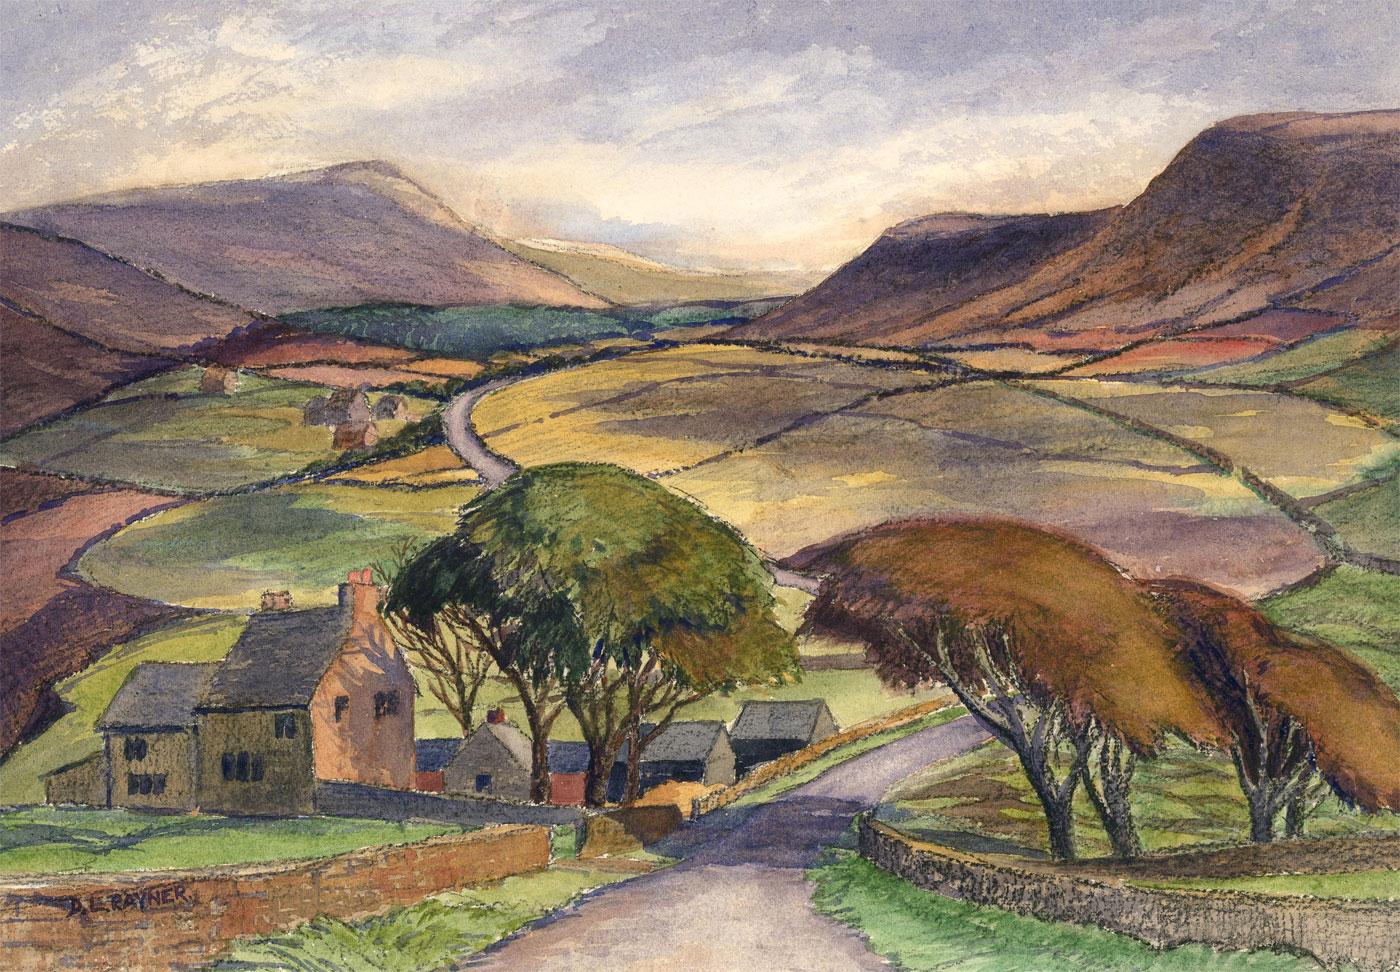 Unknown Landscape Art - Donald Lewis Rayner (1907-1977) - 1948 Watercolour, Monks Road, Charlesworth